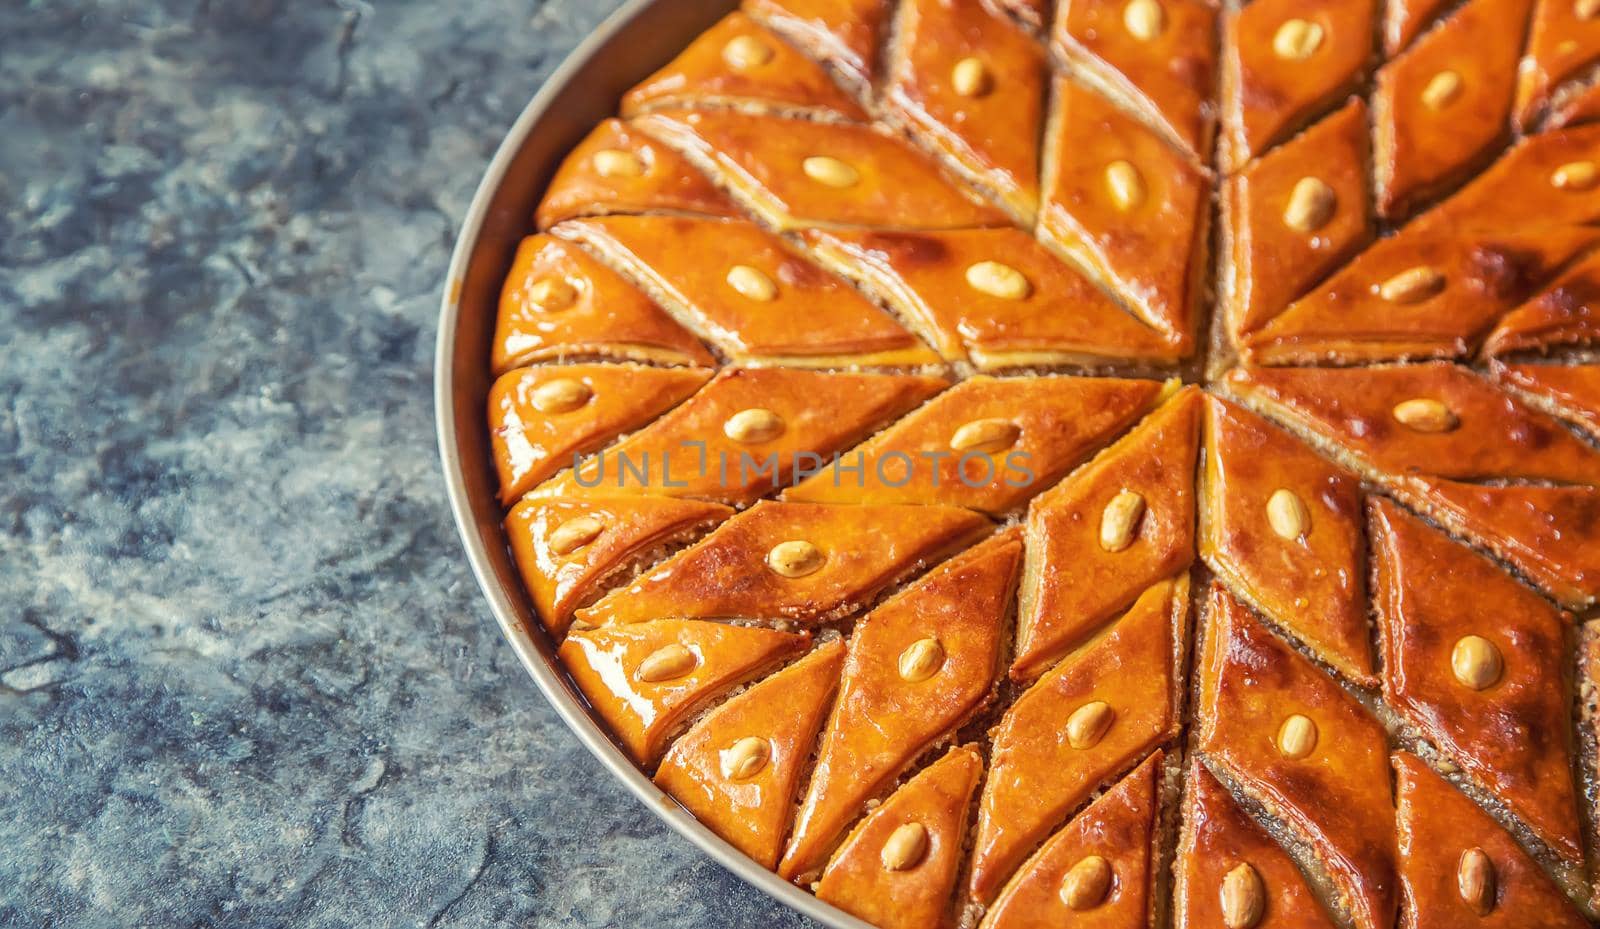 Oriental sweet baklava with nuts. Selective focus. Food.